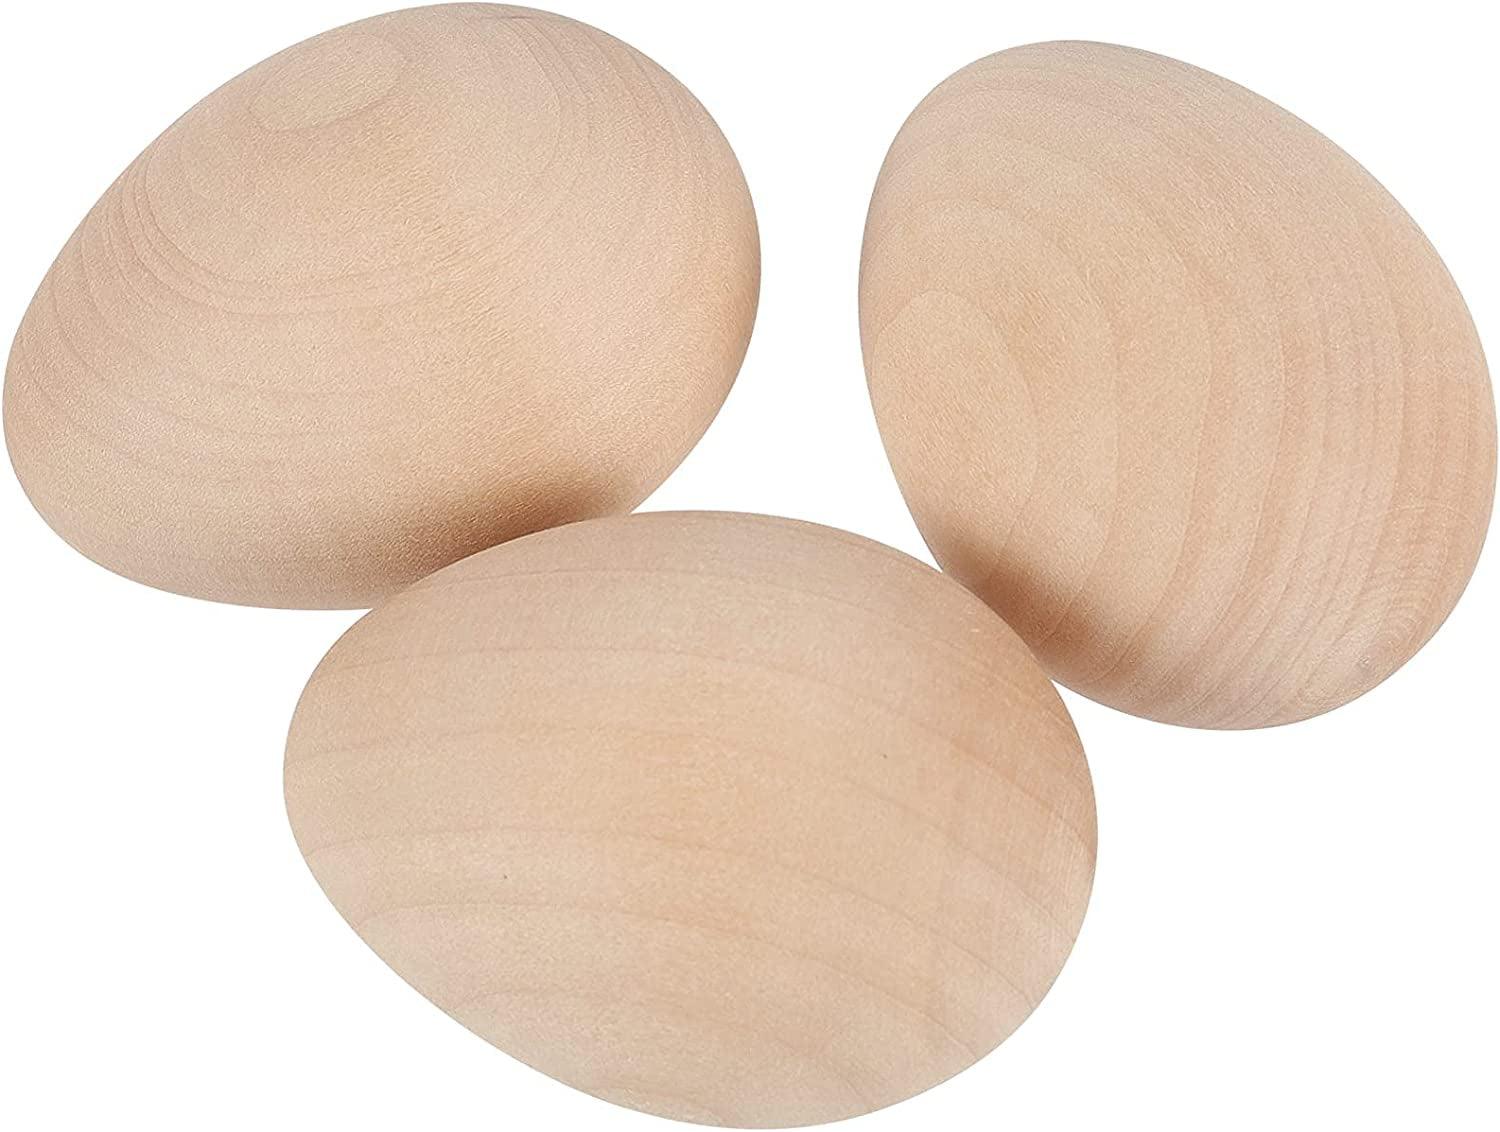 6 Quality Wood Easter Eggs to Paint, Smooth Wooden Eggs for Crafts, Wood Eggs for Crafts & Easter Decor 2-1/2 in, by Woodpeckers, Men's